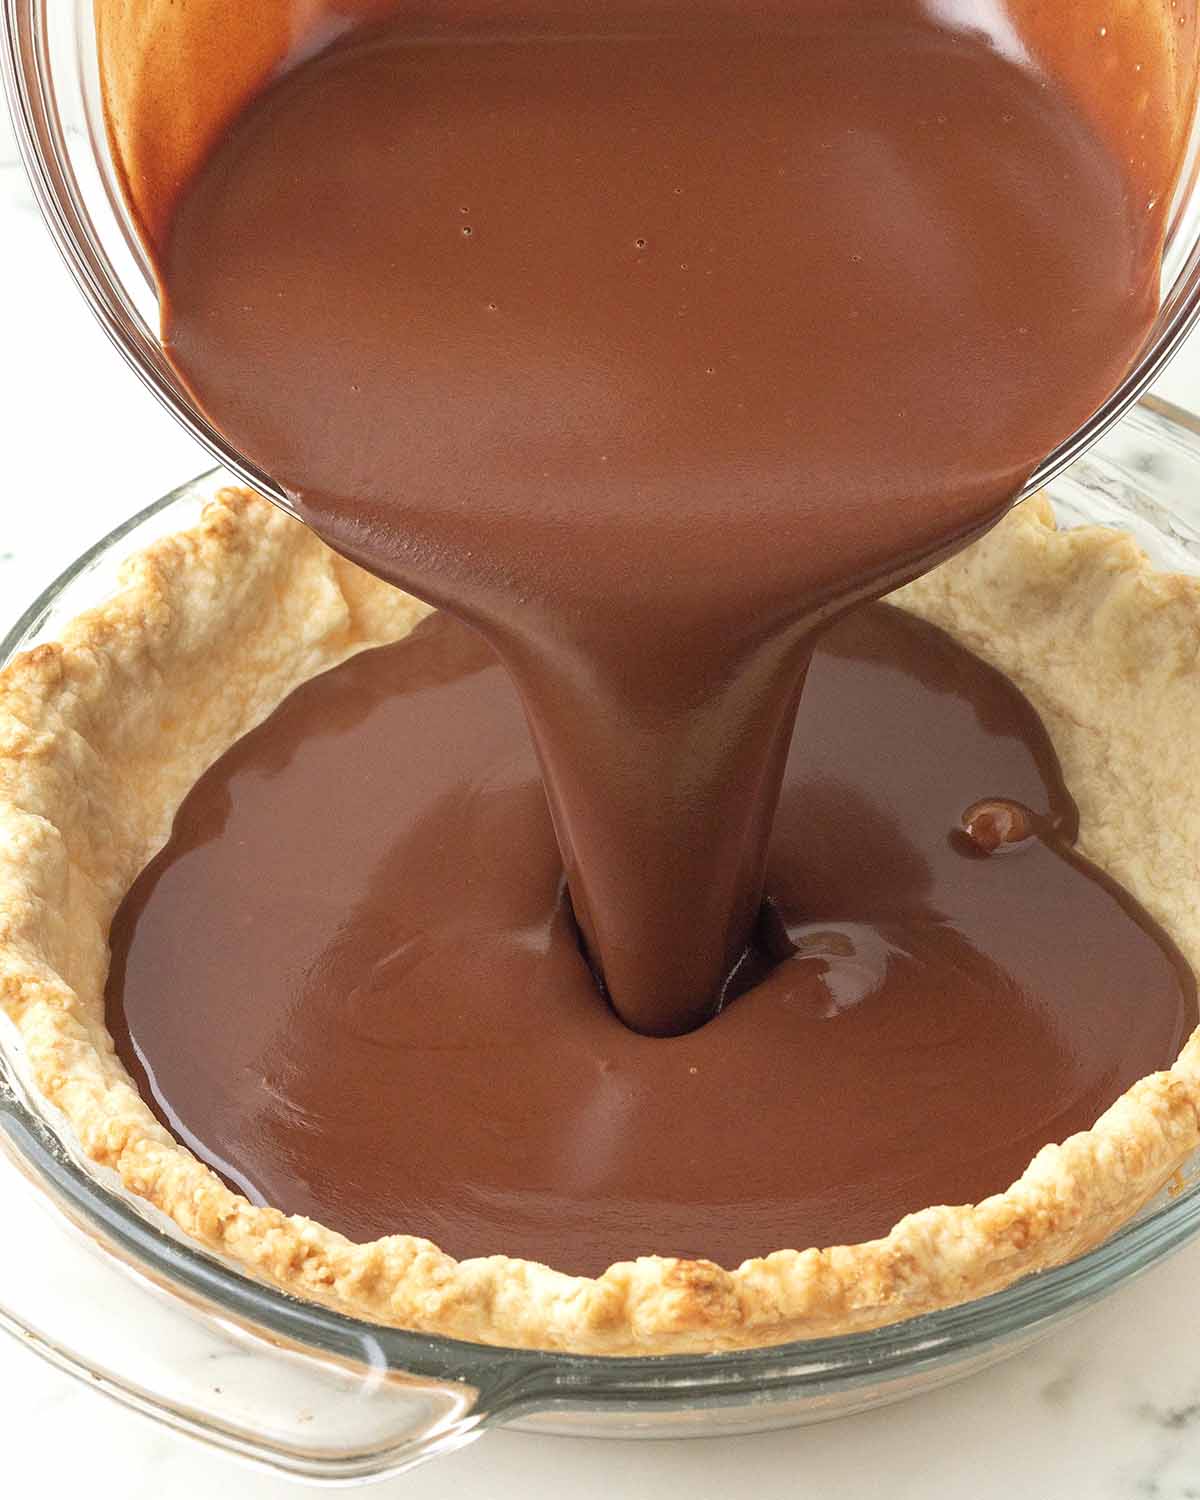 Vegan chocolate pie filling is being poured into a pre-baked pastry pie crust.